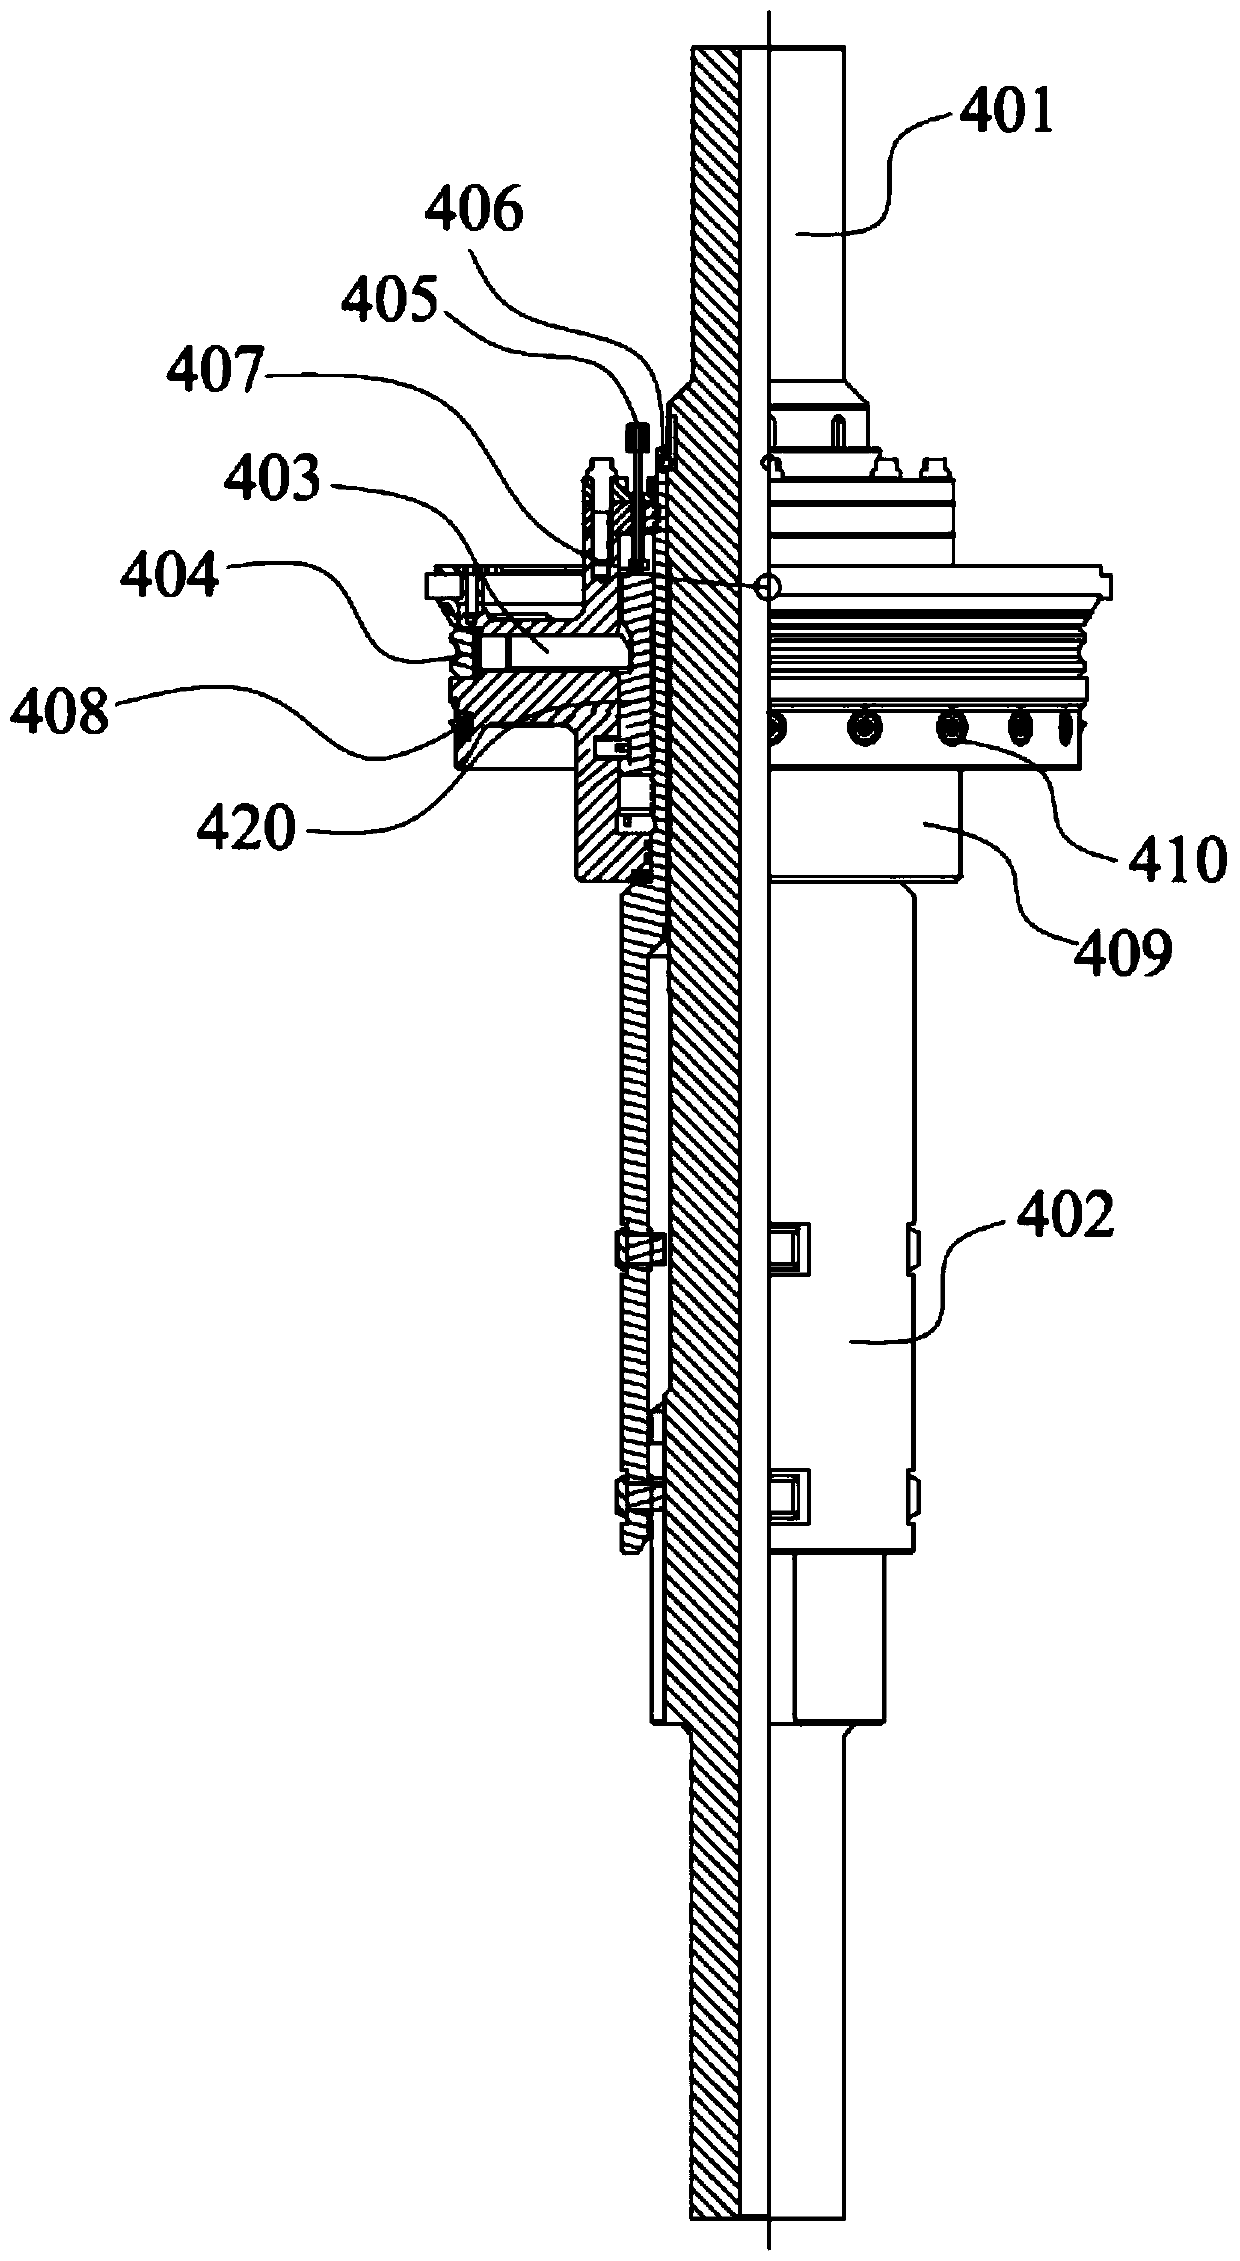 Deepwater surface conduit feeding tool function test experimental device and method